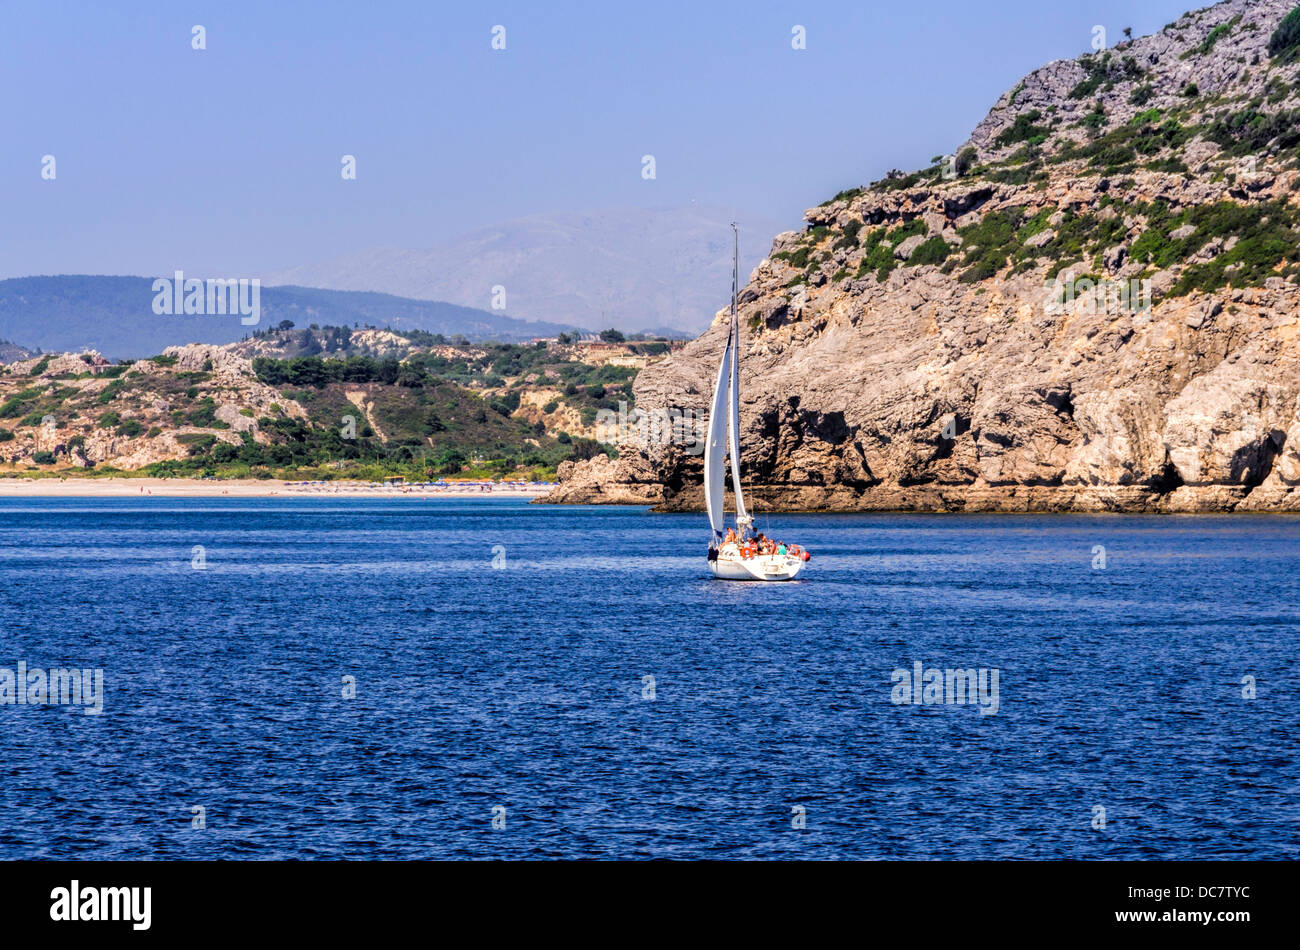 Yacht loaded with holidaymakers sailing towards a rocky island through a calm blue ocean Stock Photo